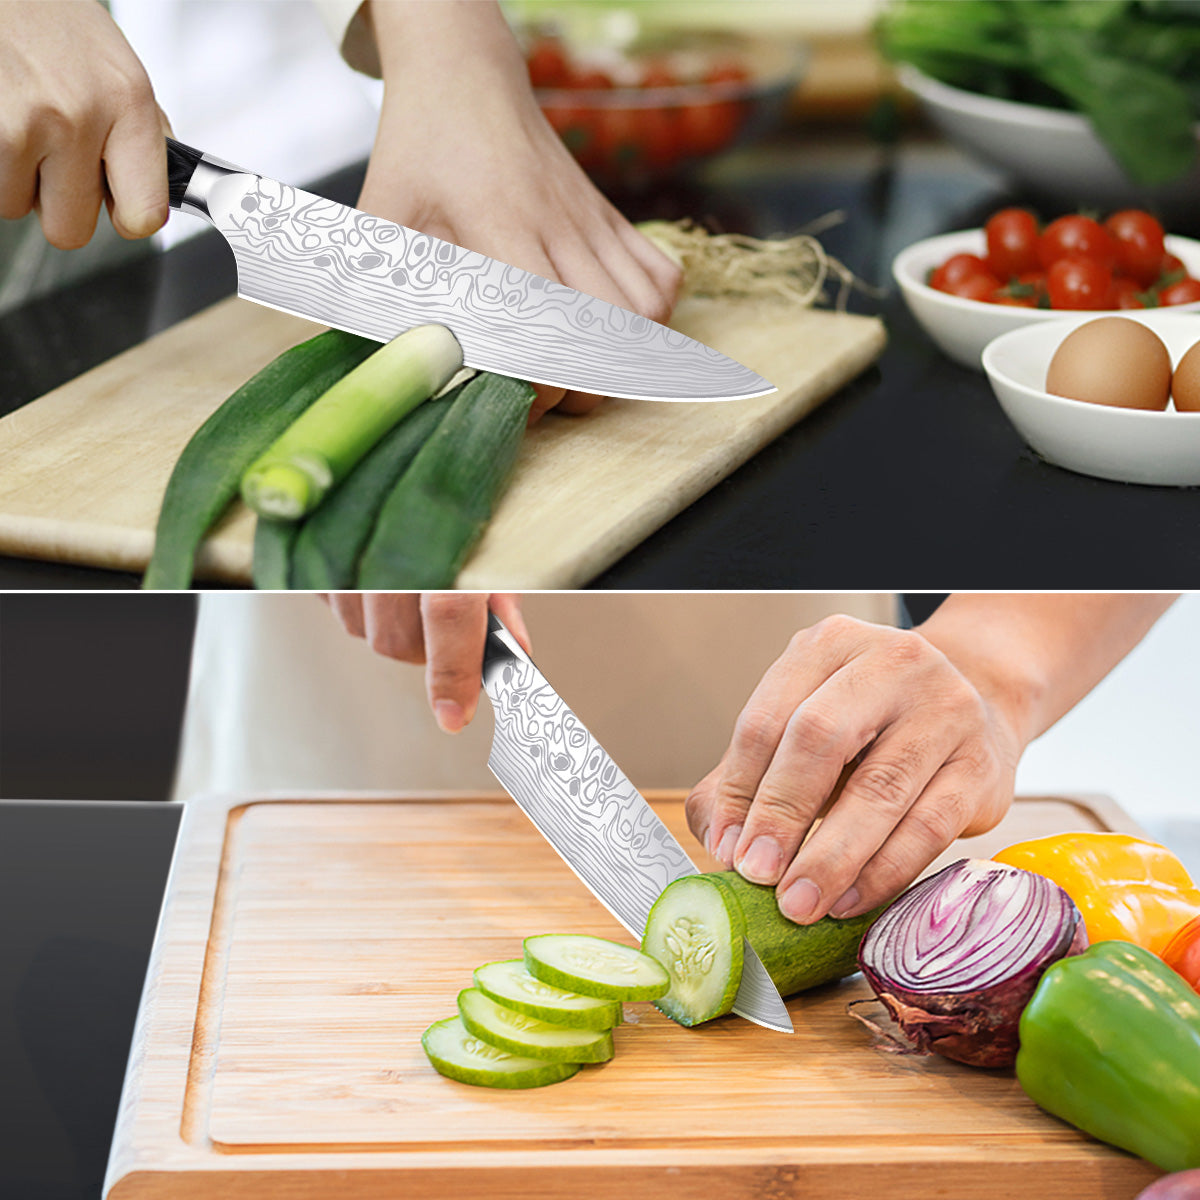 MOSFiATA 8"  Chef's Knife with Finger Guard and Knife Sharpener